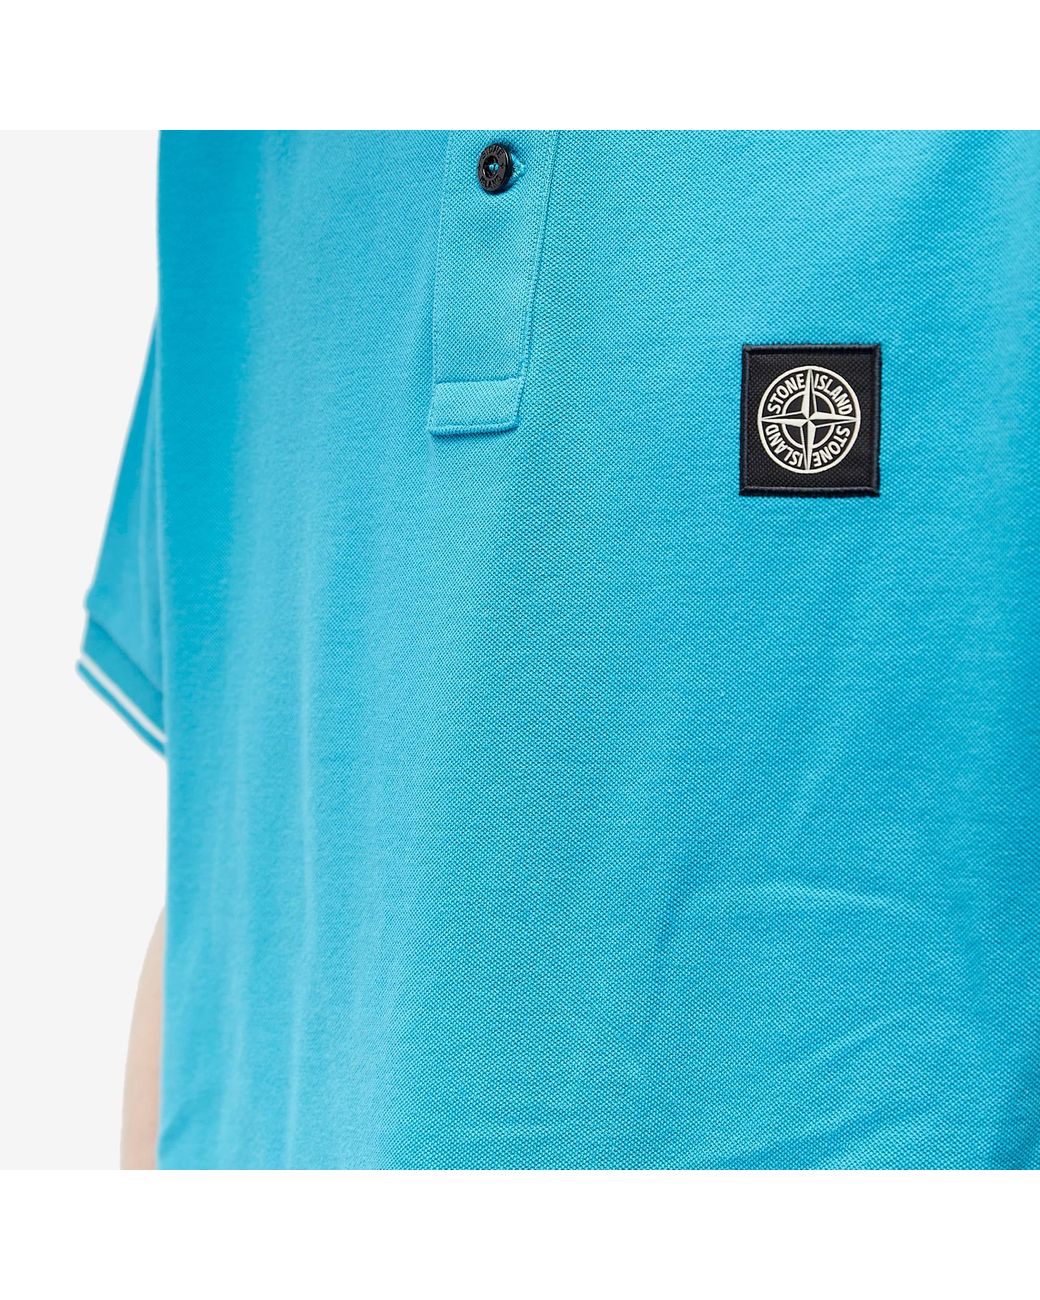 Stone Island Patch Polo Shirt in Blue for Men | Lyst